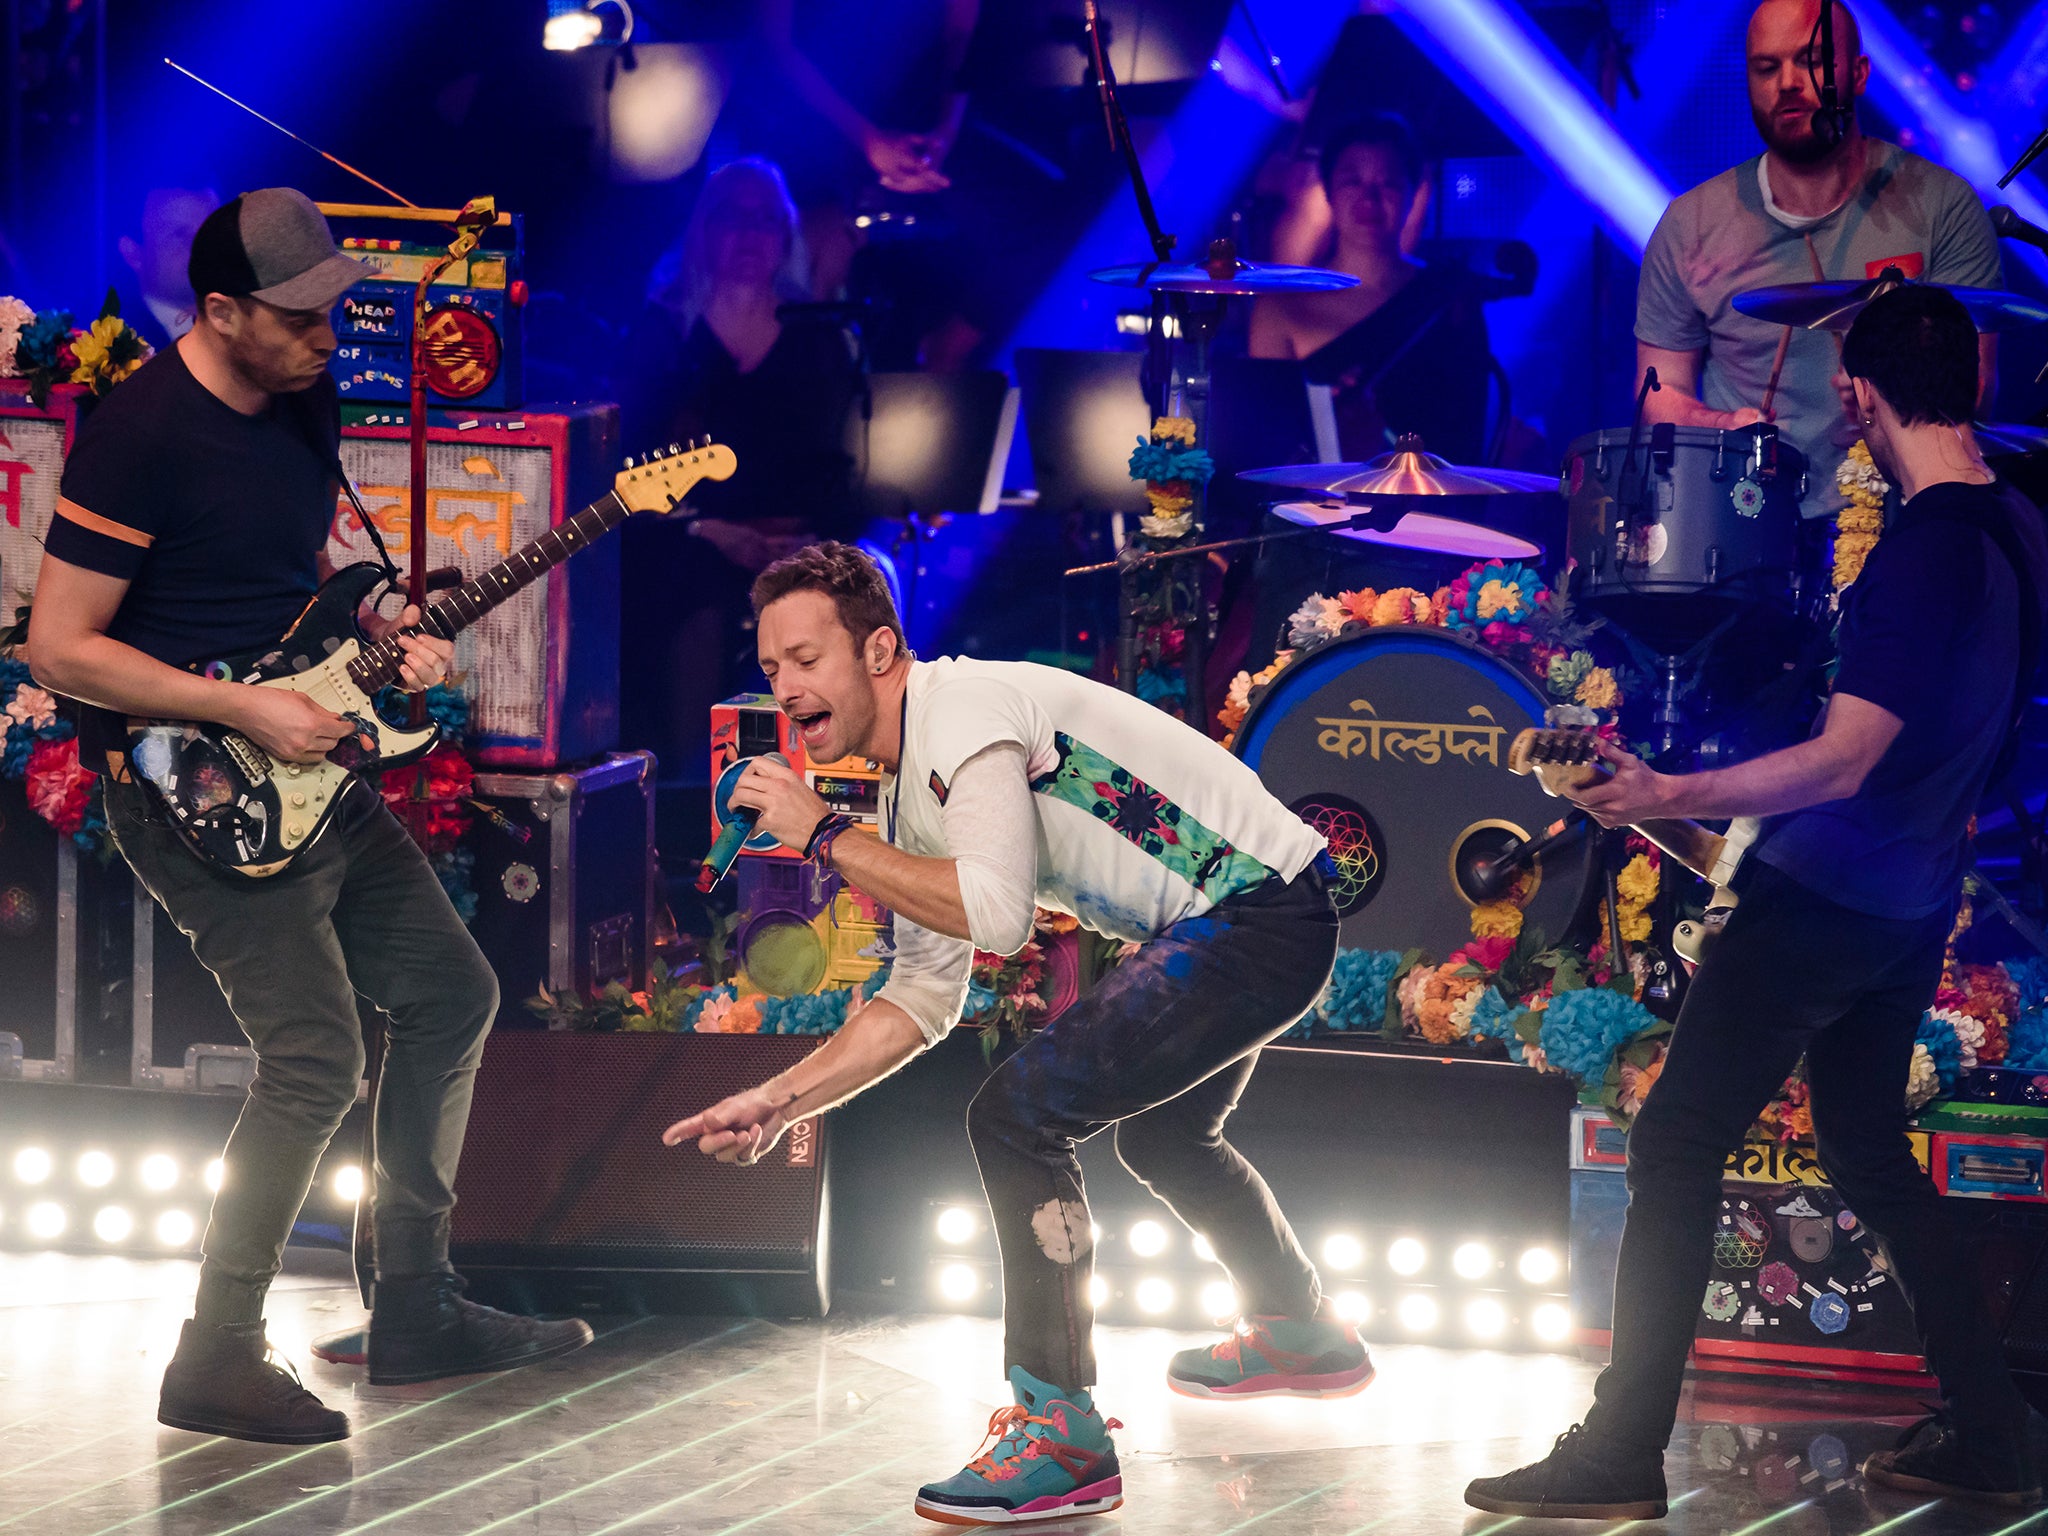 Coldplay Set To Launch Their Album in Jordan in a Major Concert About Her